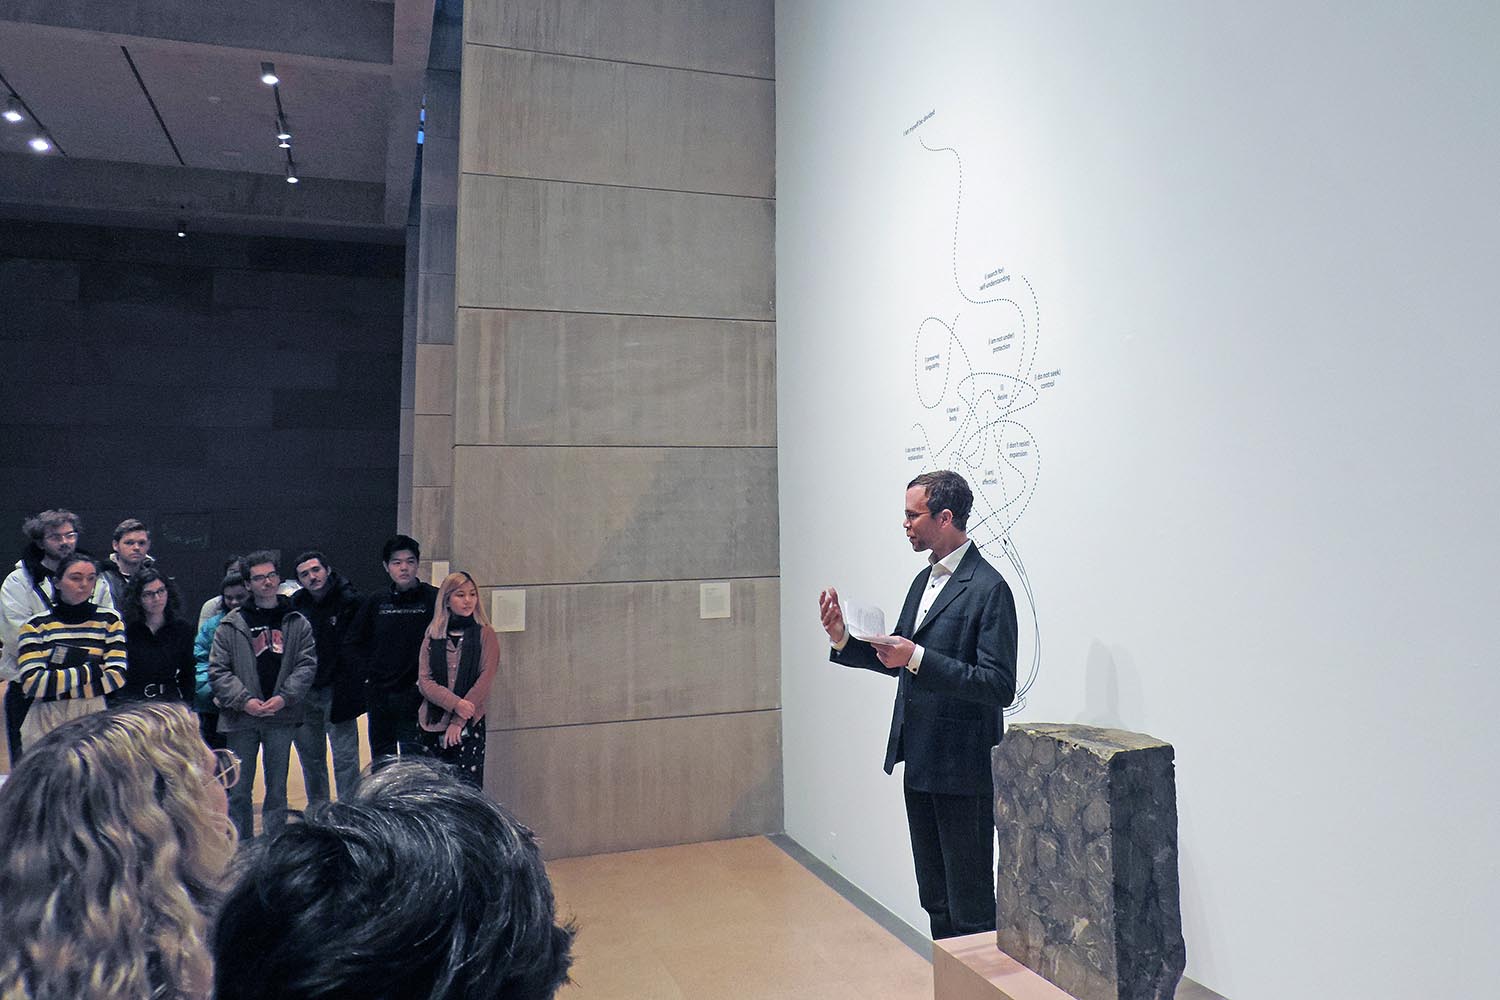 The opening reception included opening remarks by Curator Benjamin Chaffee, associate director of visual arts.